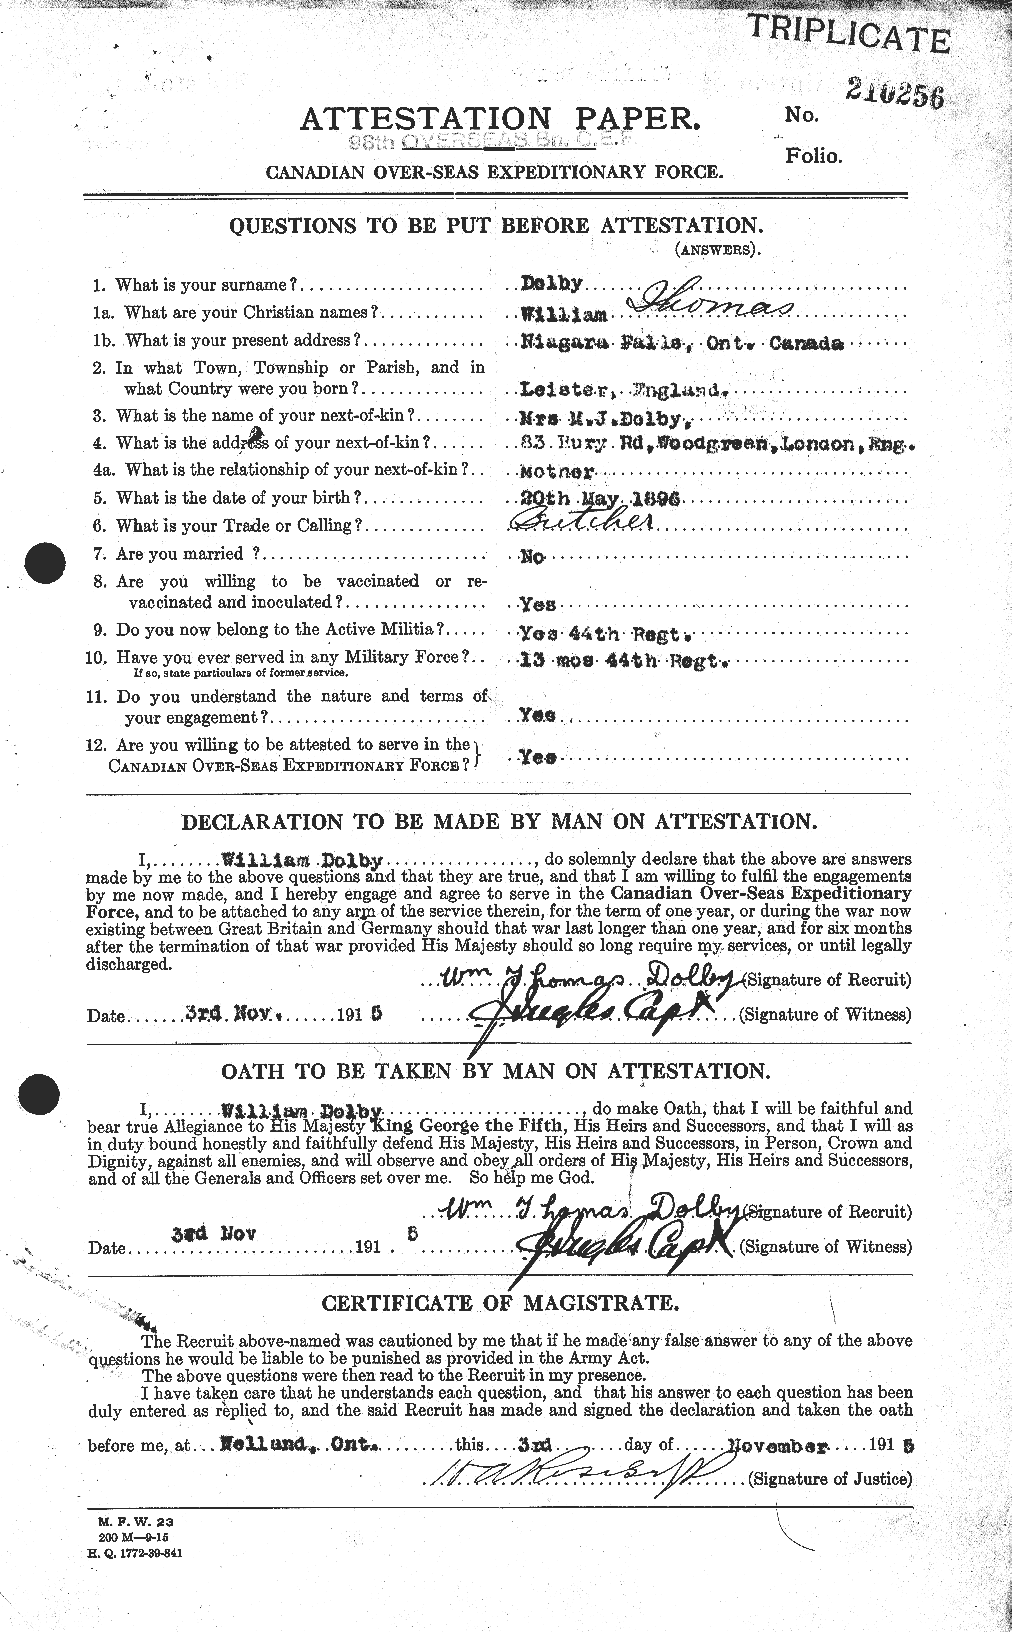 Personnel Records of the First World War - CEF 293606a